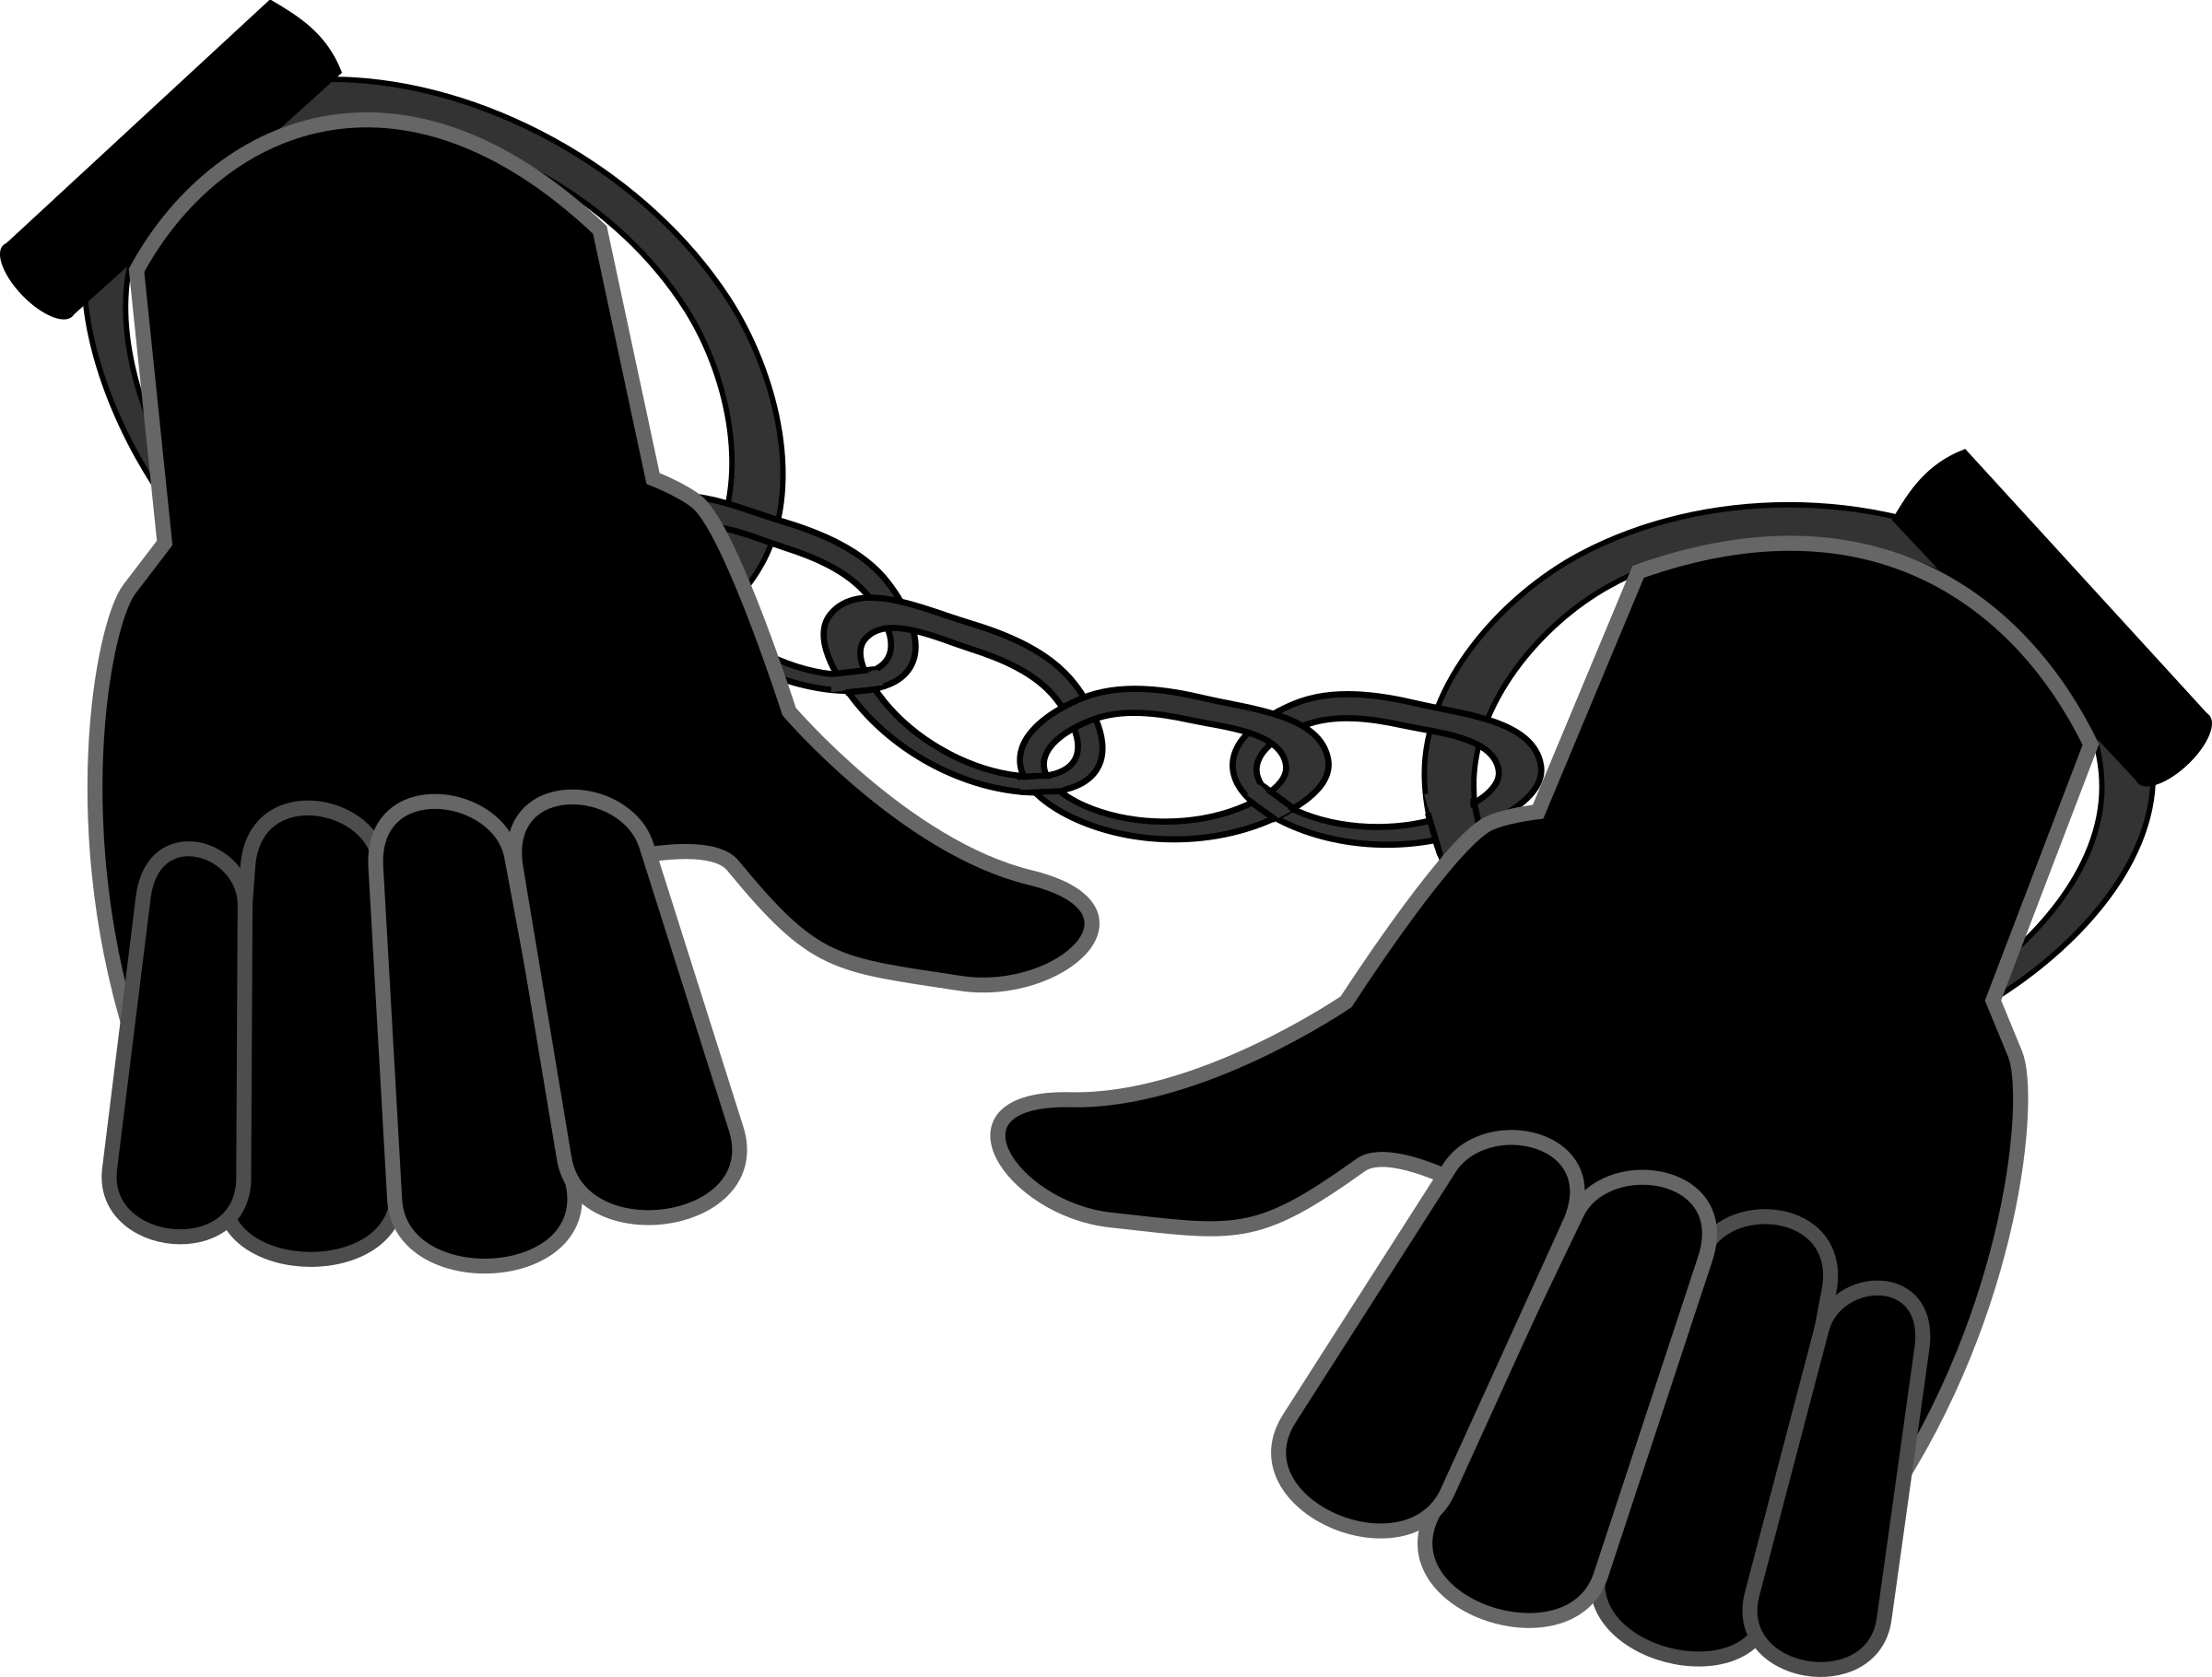 BIG IMAGE (PNG), Cuffed Hands PNG - Free PNG